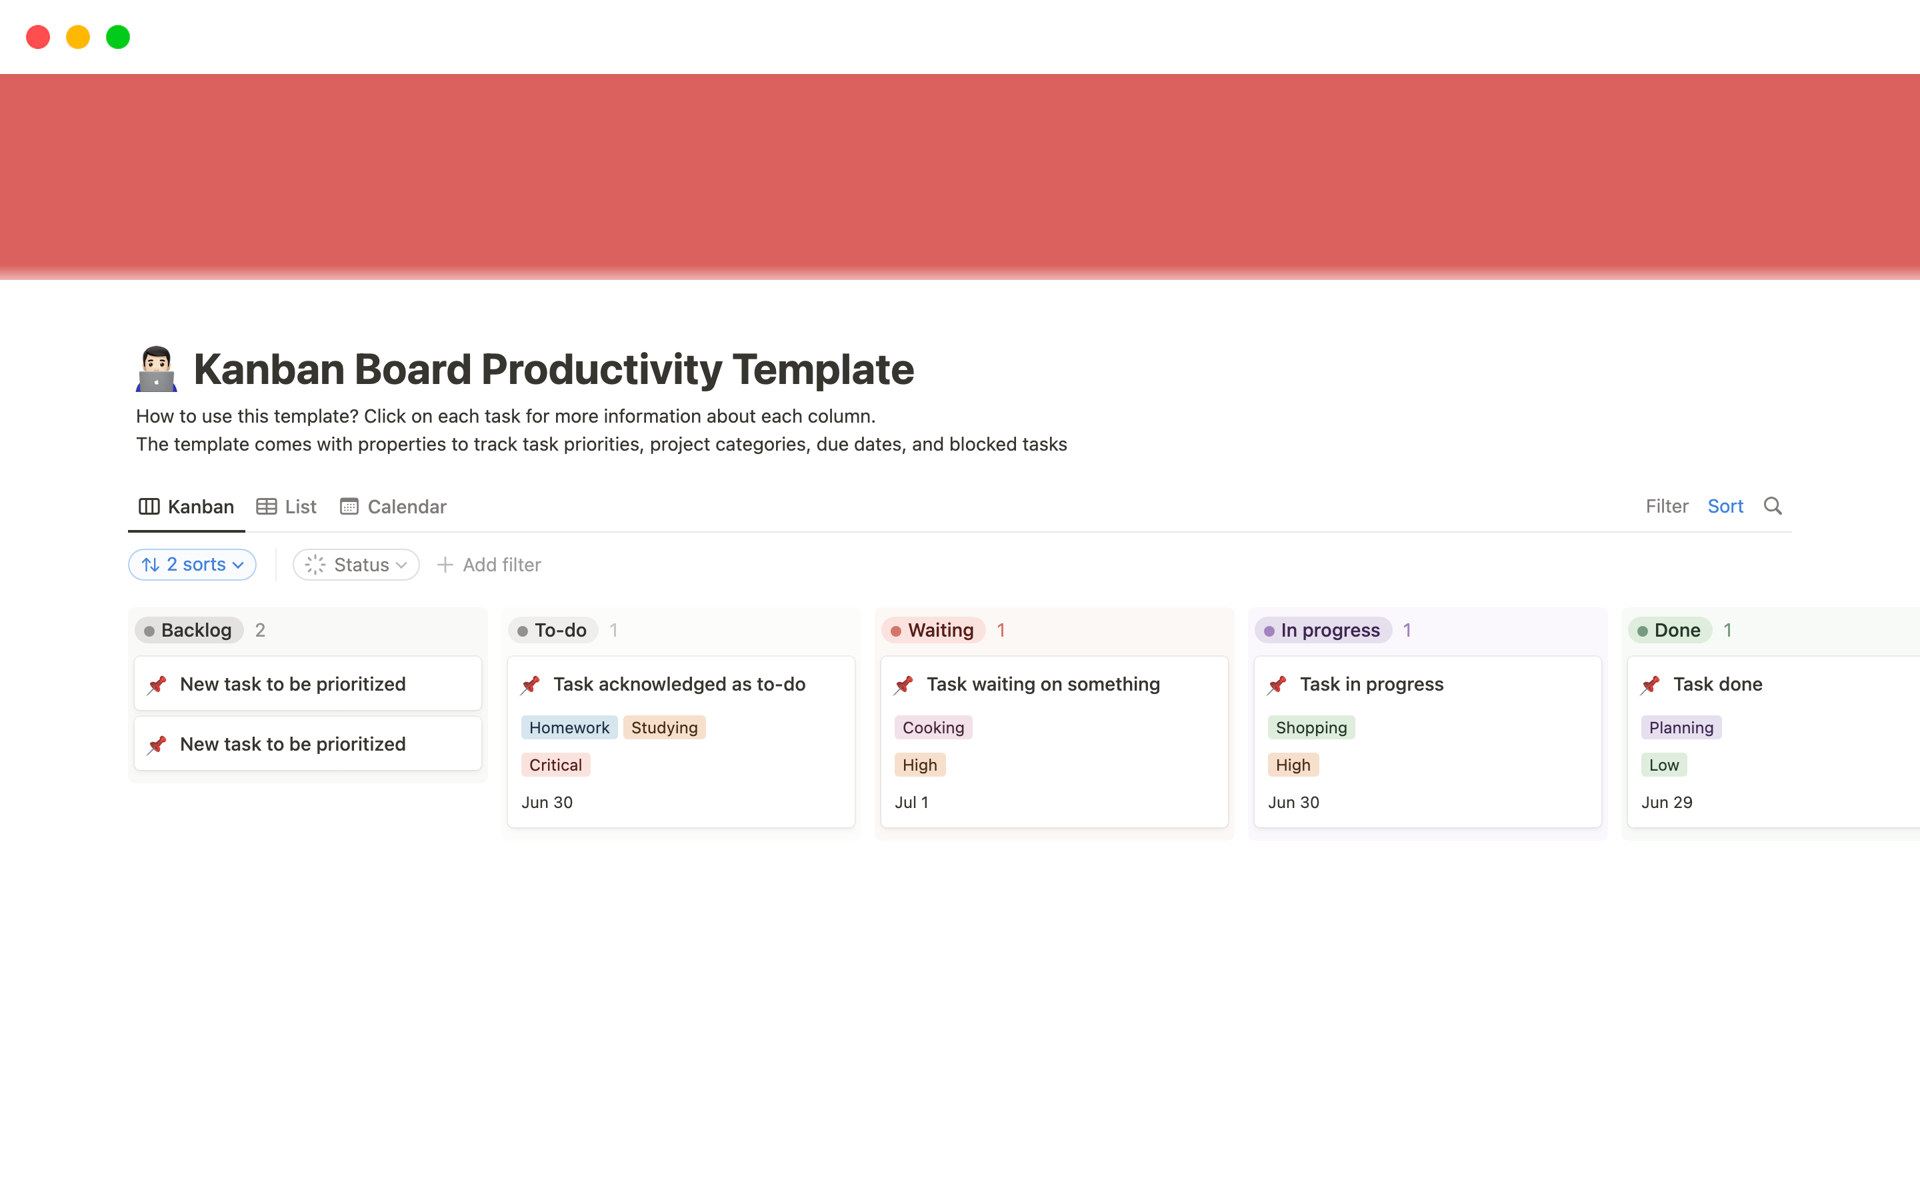 Manage your productivity using a kanban style board.